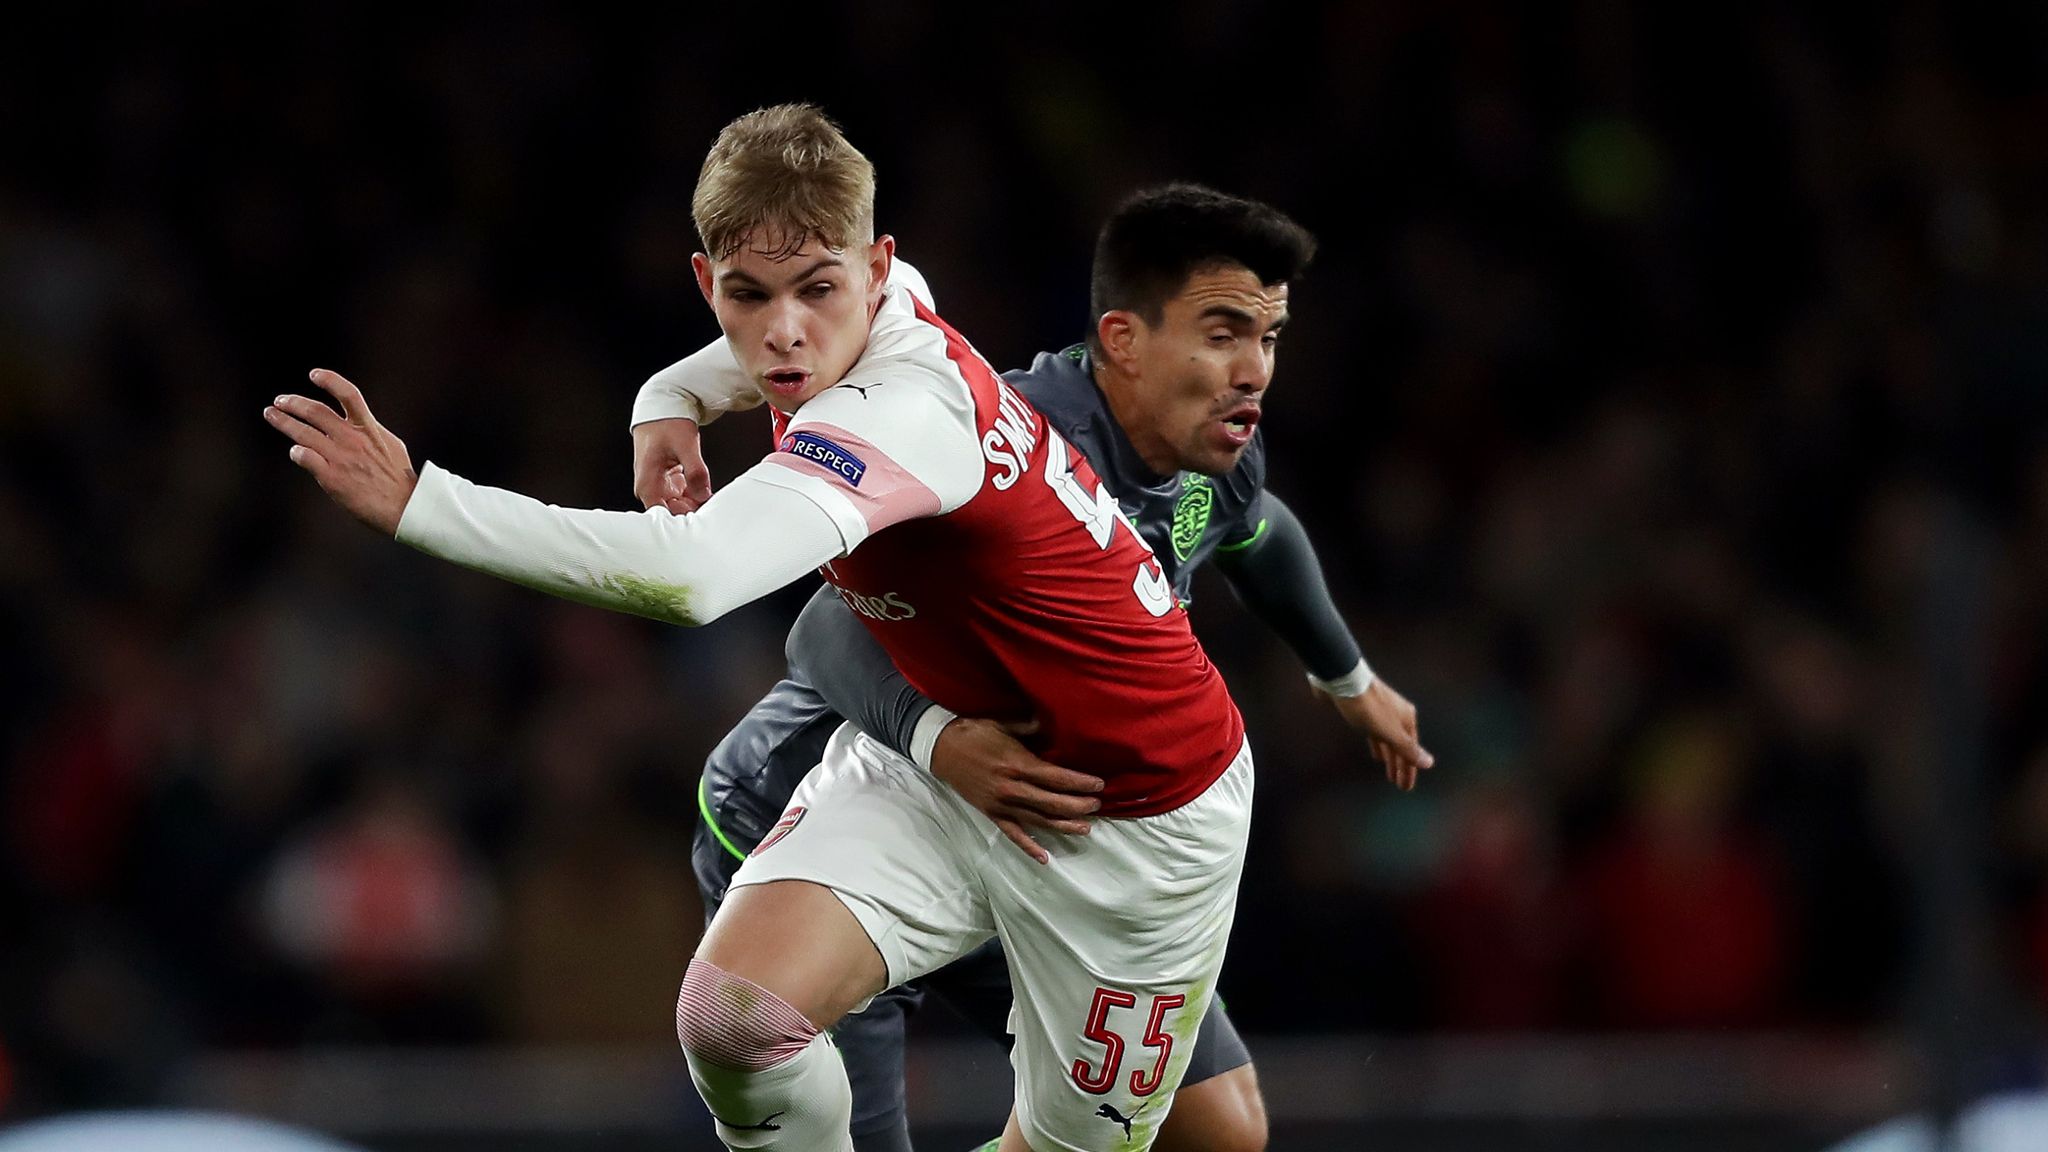 Emile Smith Rowe Arsenal S Rising Star Taking His Chances Under